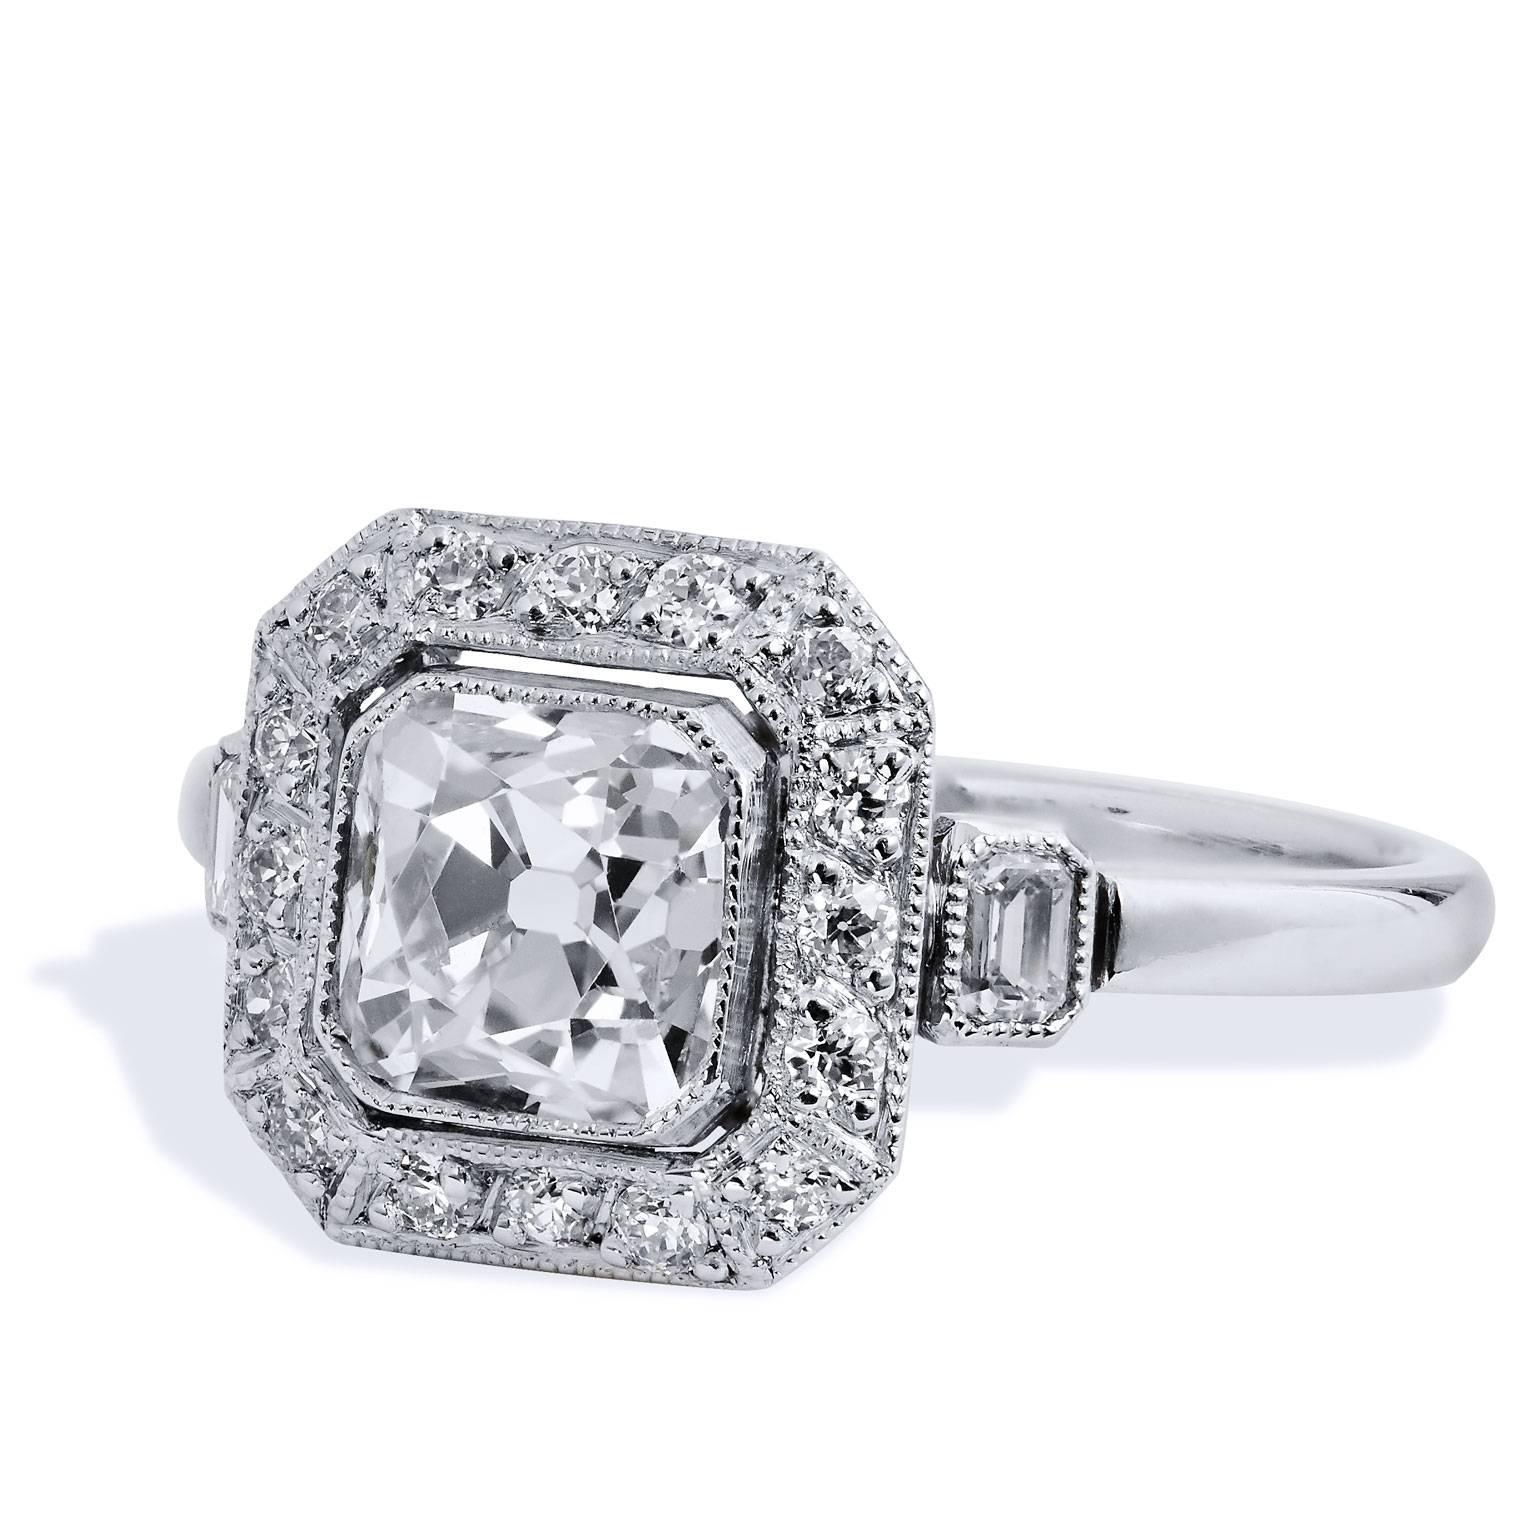 This platinum engagement ring features a rare 1.29 carat (N/VS2; GIA #2175226772) Peruzzi cut diamond at center. When compared to the modern round brilliant, the Peruzzi has a small table, a big crown and is much taller.Two pieces of emerald cut